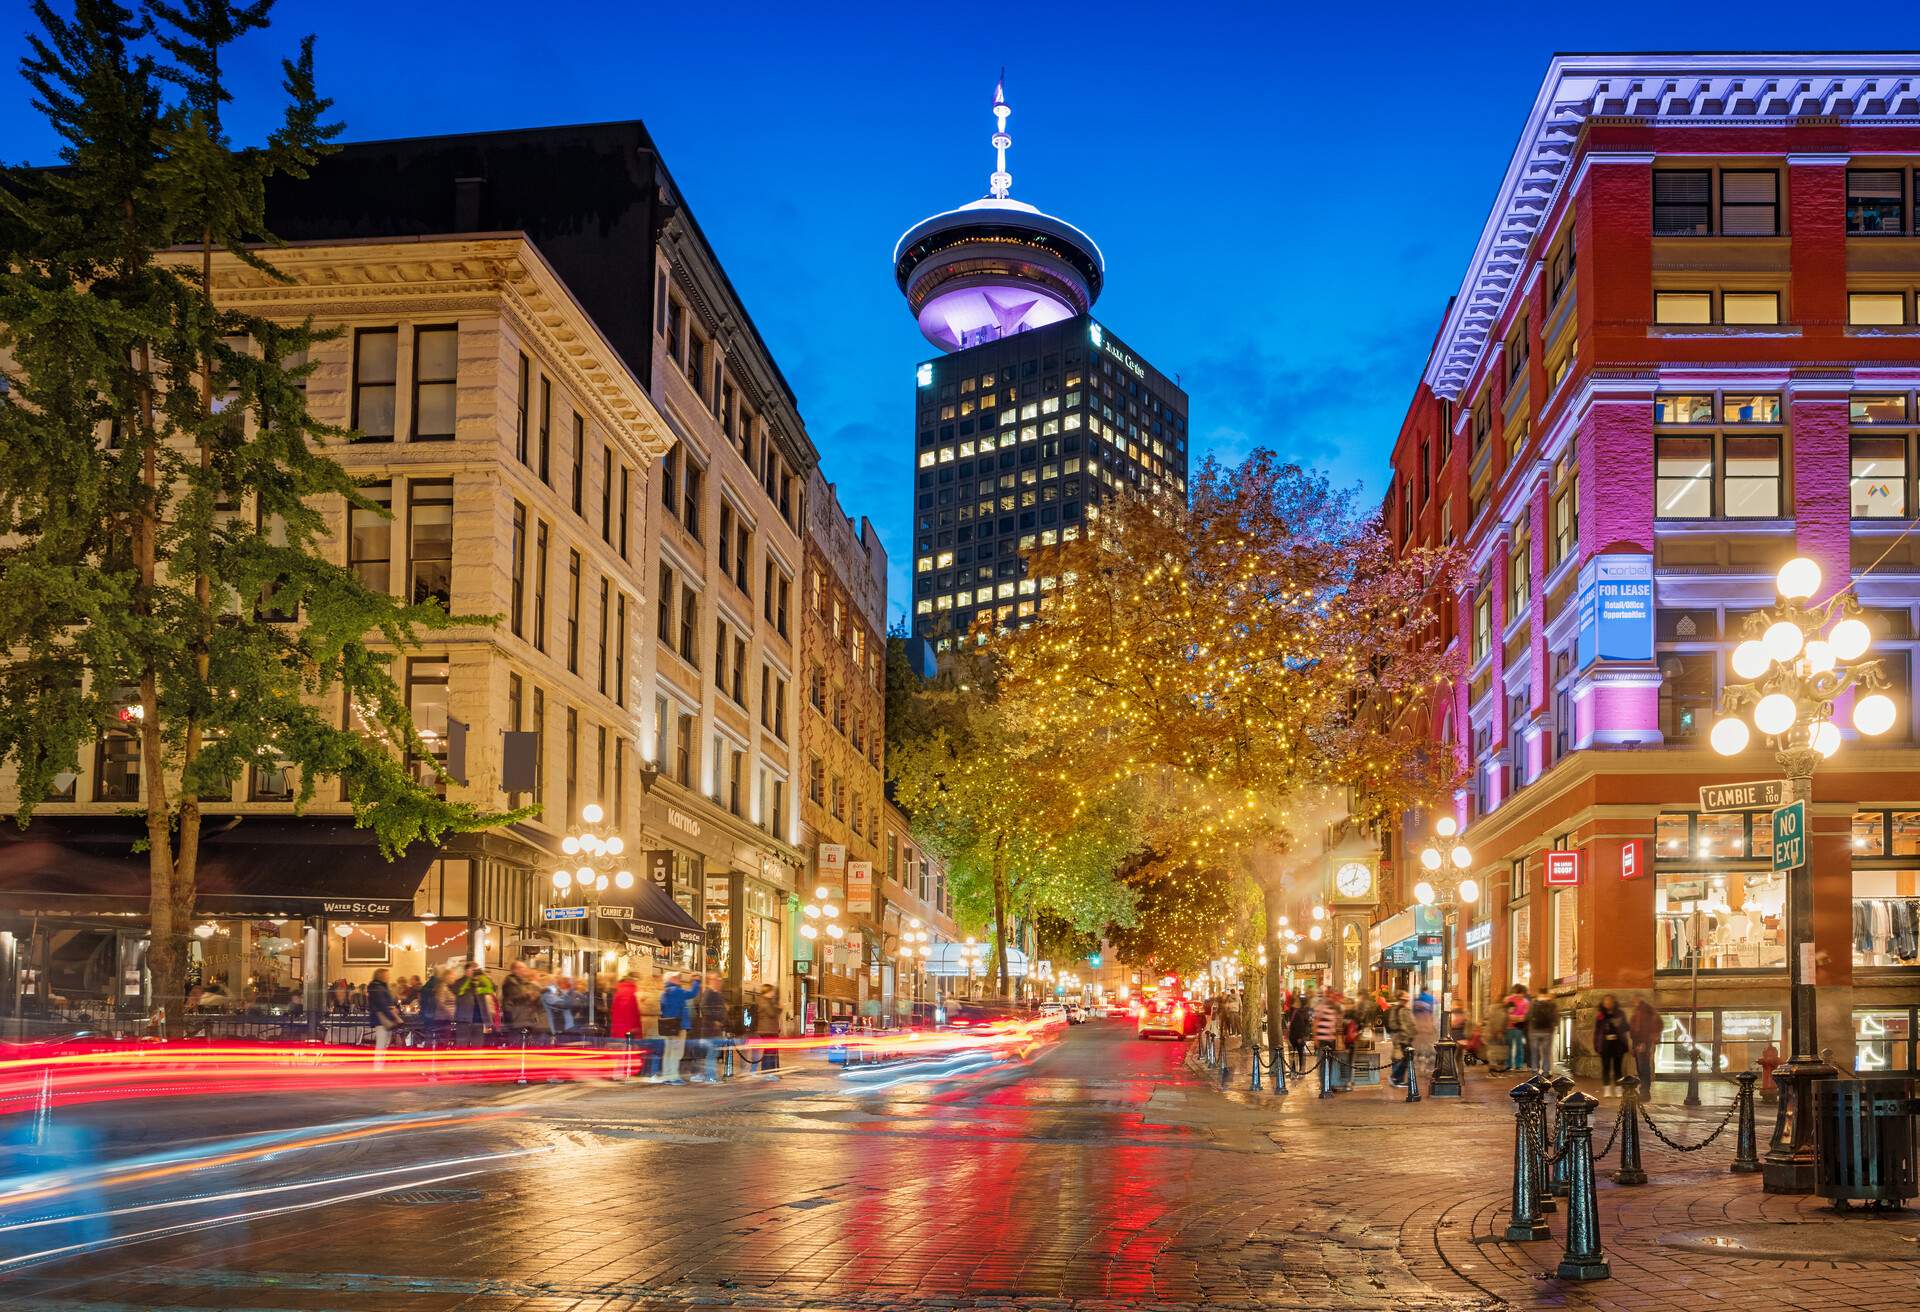 Long exposure stock photograph of Water street with the steam clock and the Vancouver Lookout in the background in Gastown, downtown Vancouver, British Columbia, Canada at twilight.